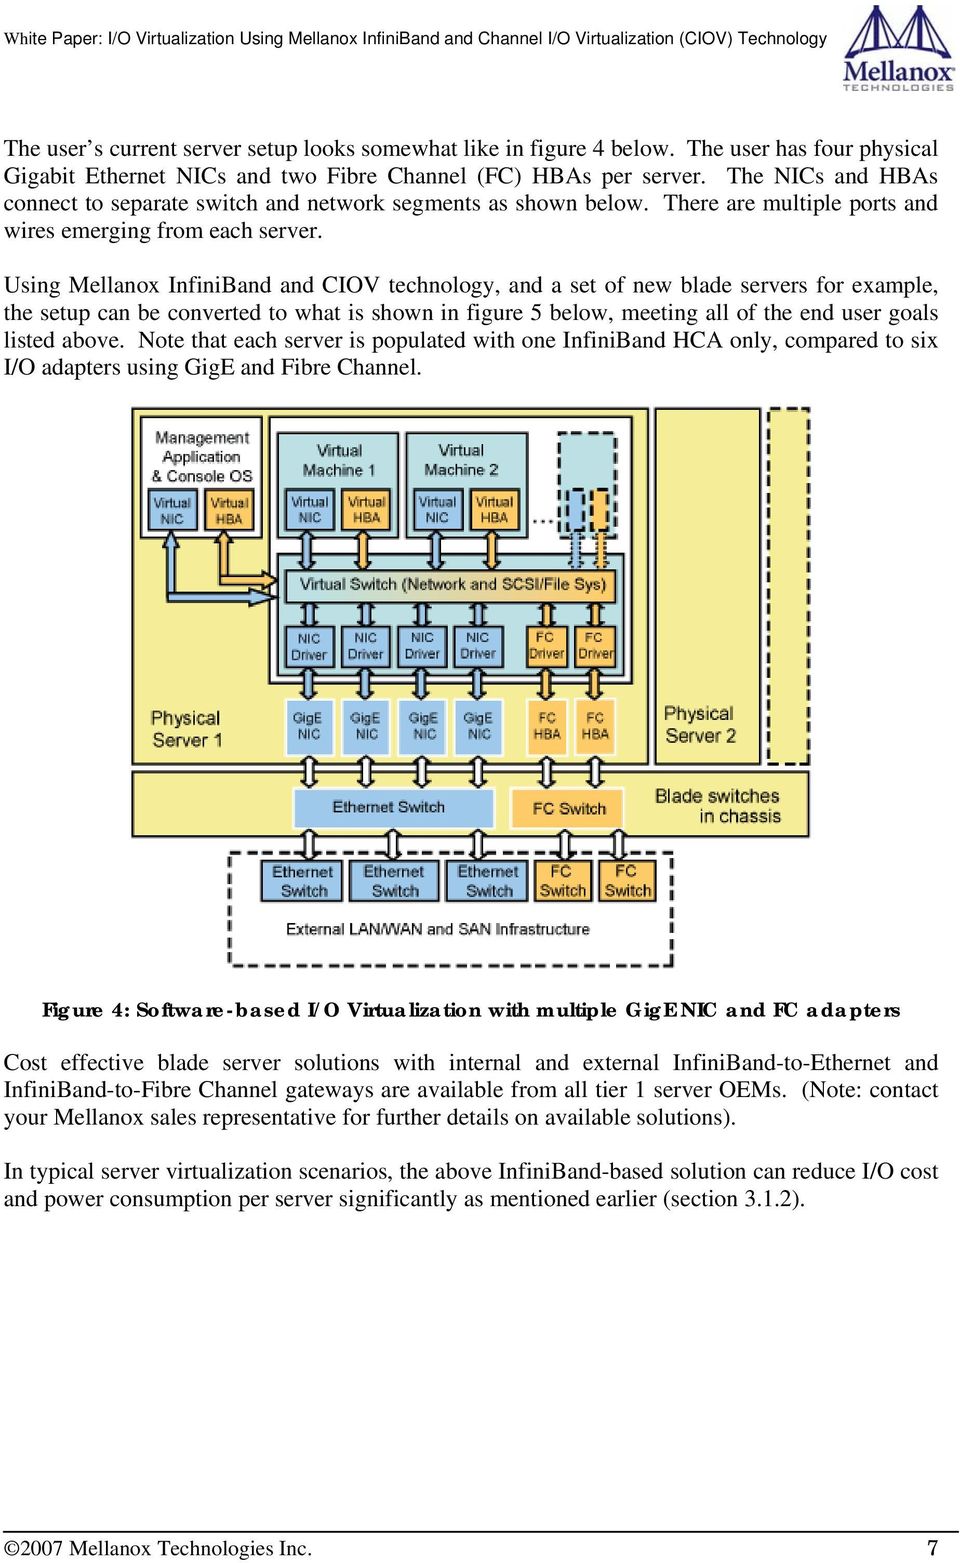 Using Mellanox InfiniBand and CIOV technology, and a set of new blade servers for example, the setup can be converted to what is shown in figure 5 below, meeting all of the end user goals listed